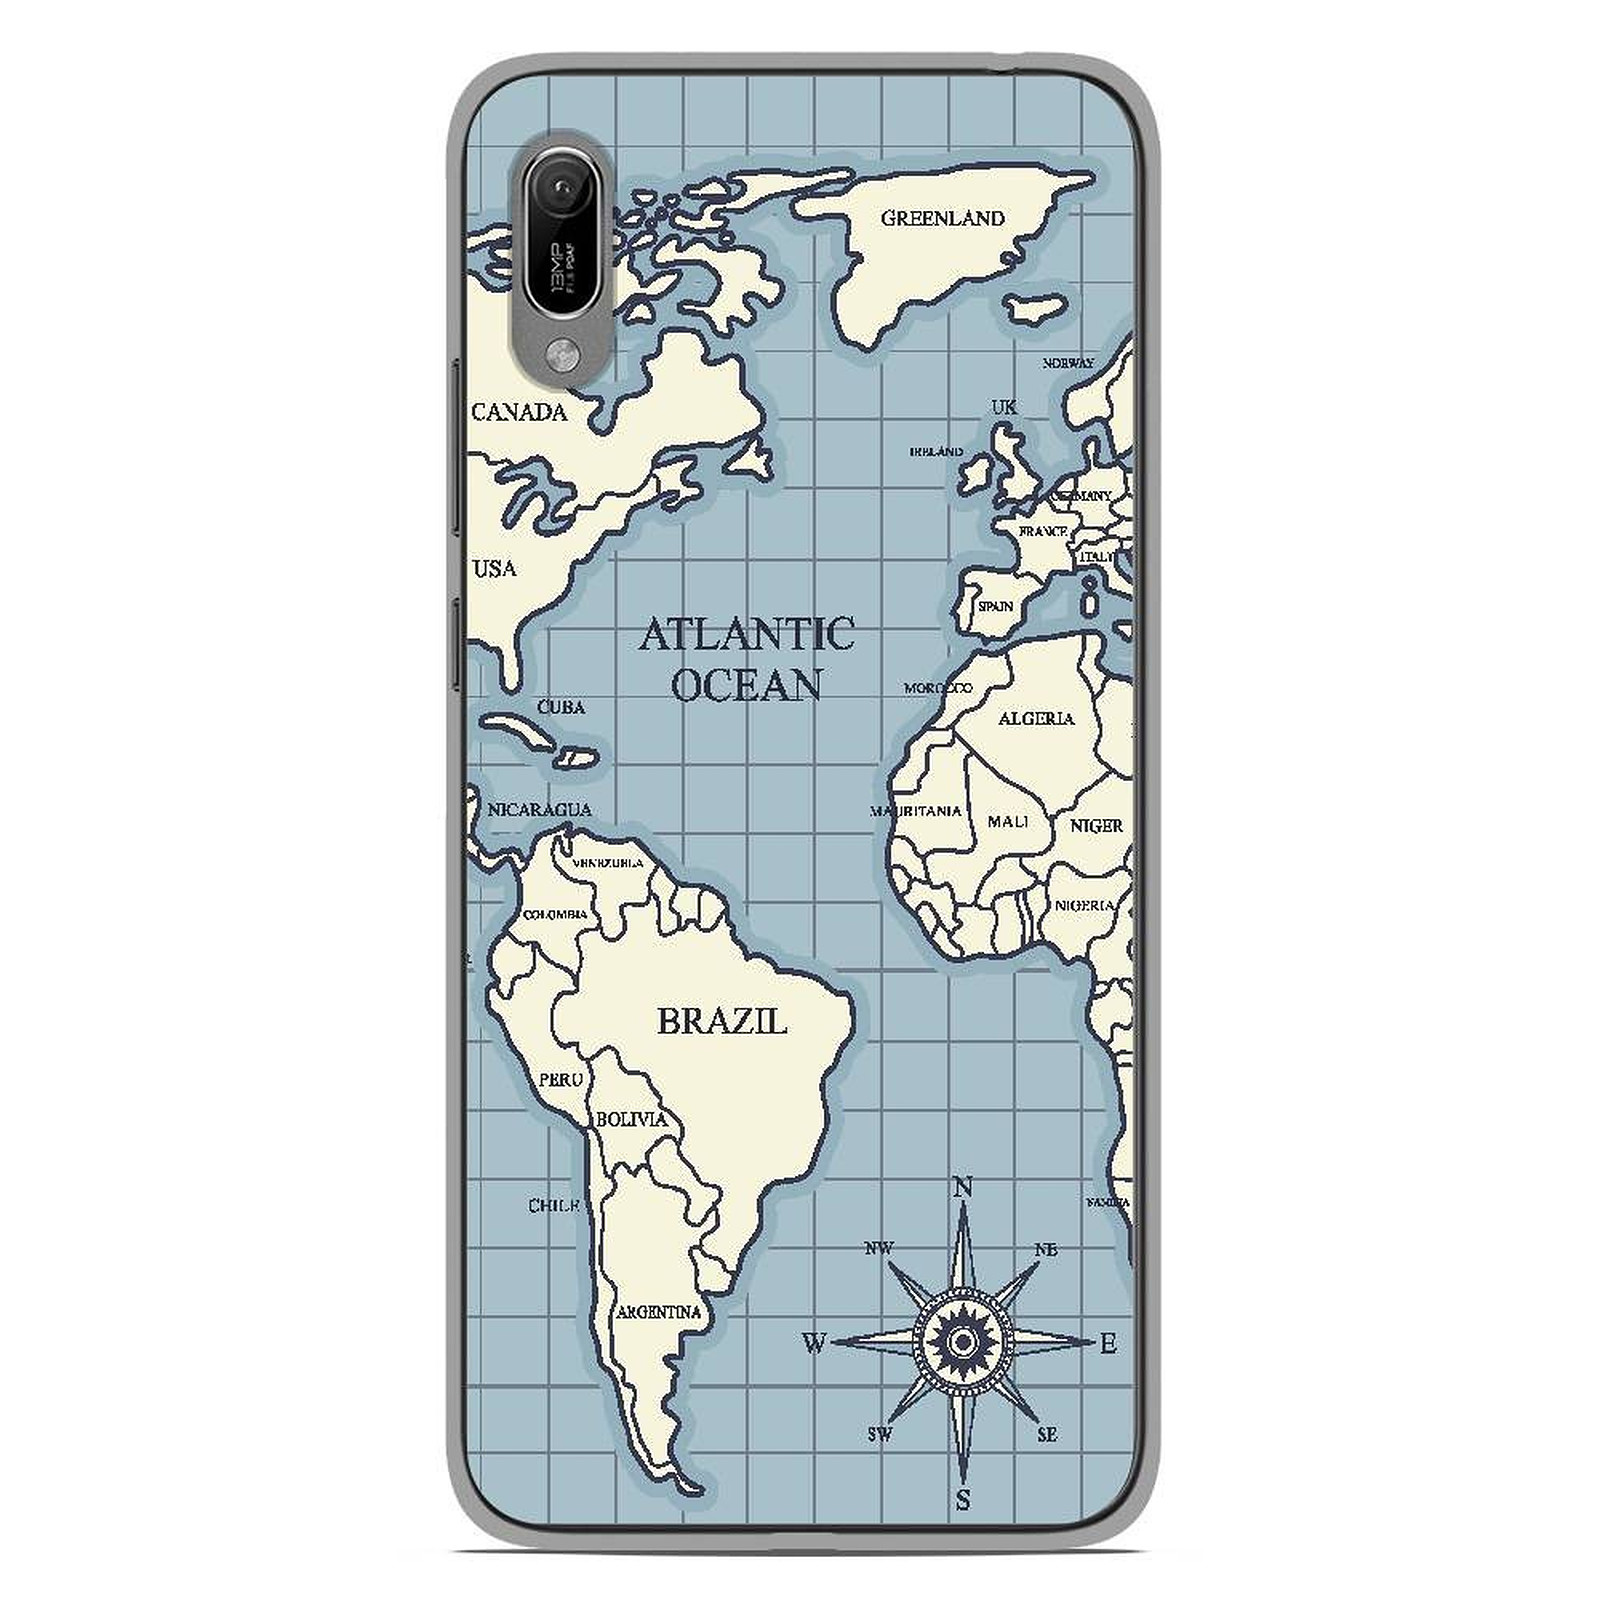 1001 Coques Coque silicone gel Huawei Y6 2019 motif Map vintage - Coque telephone 1001Coques